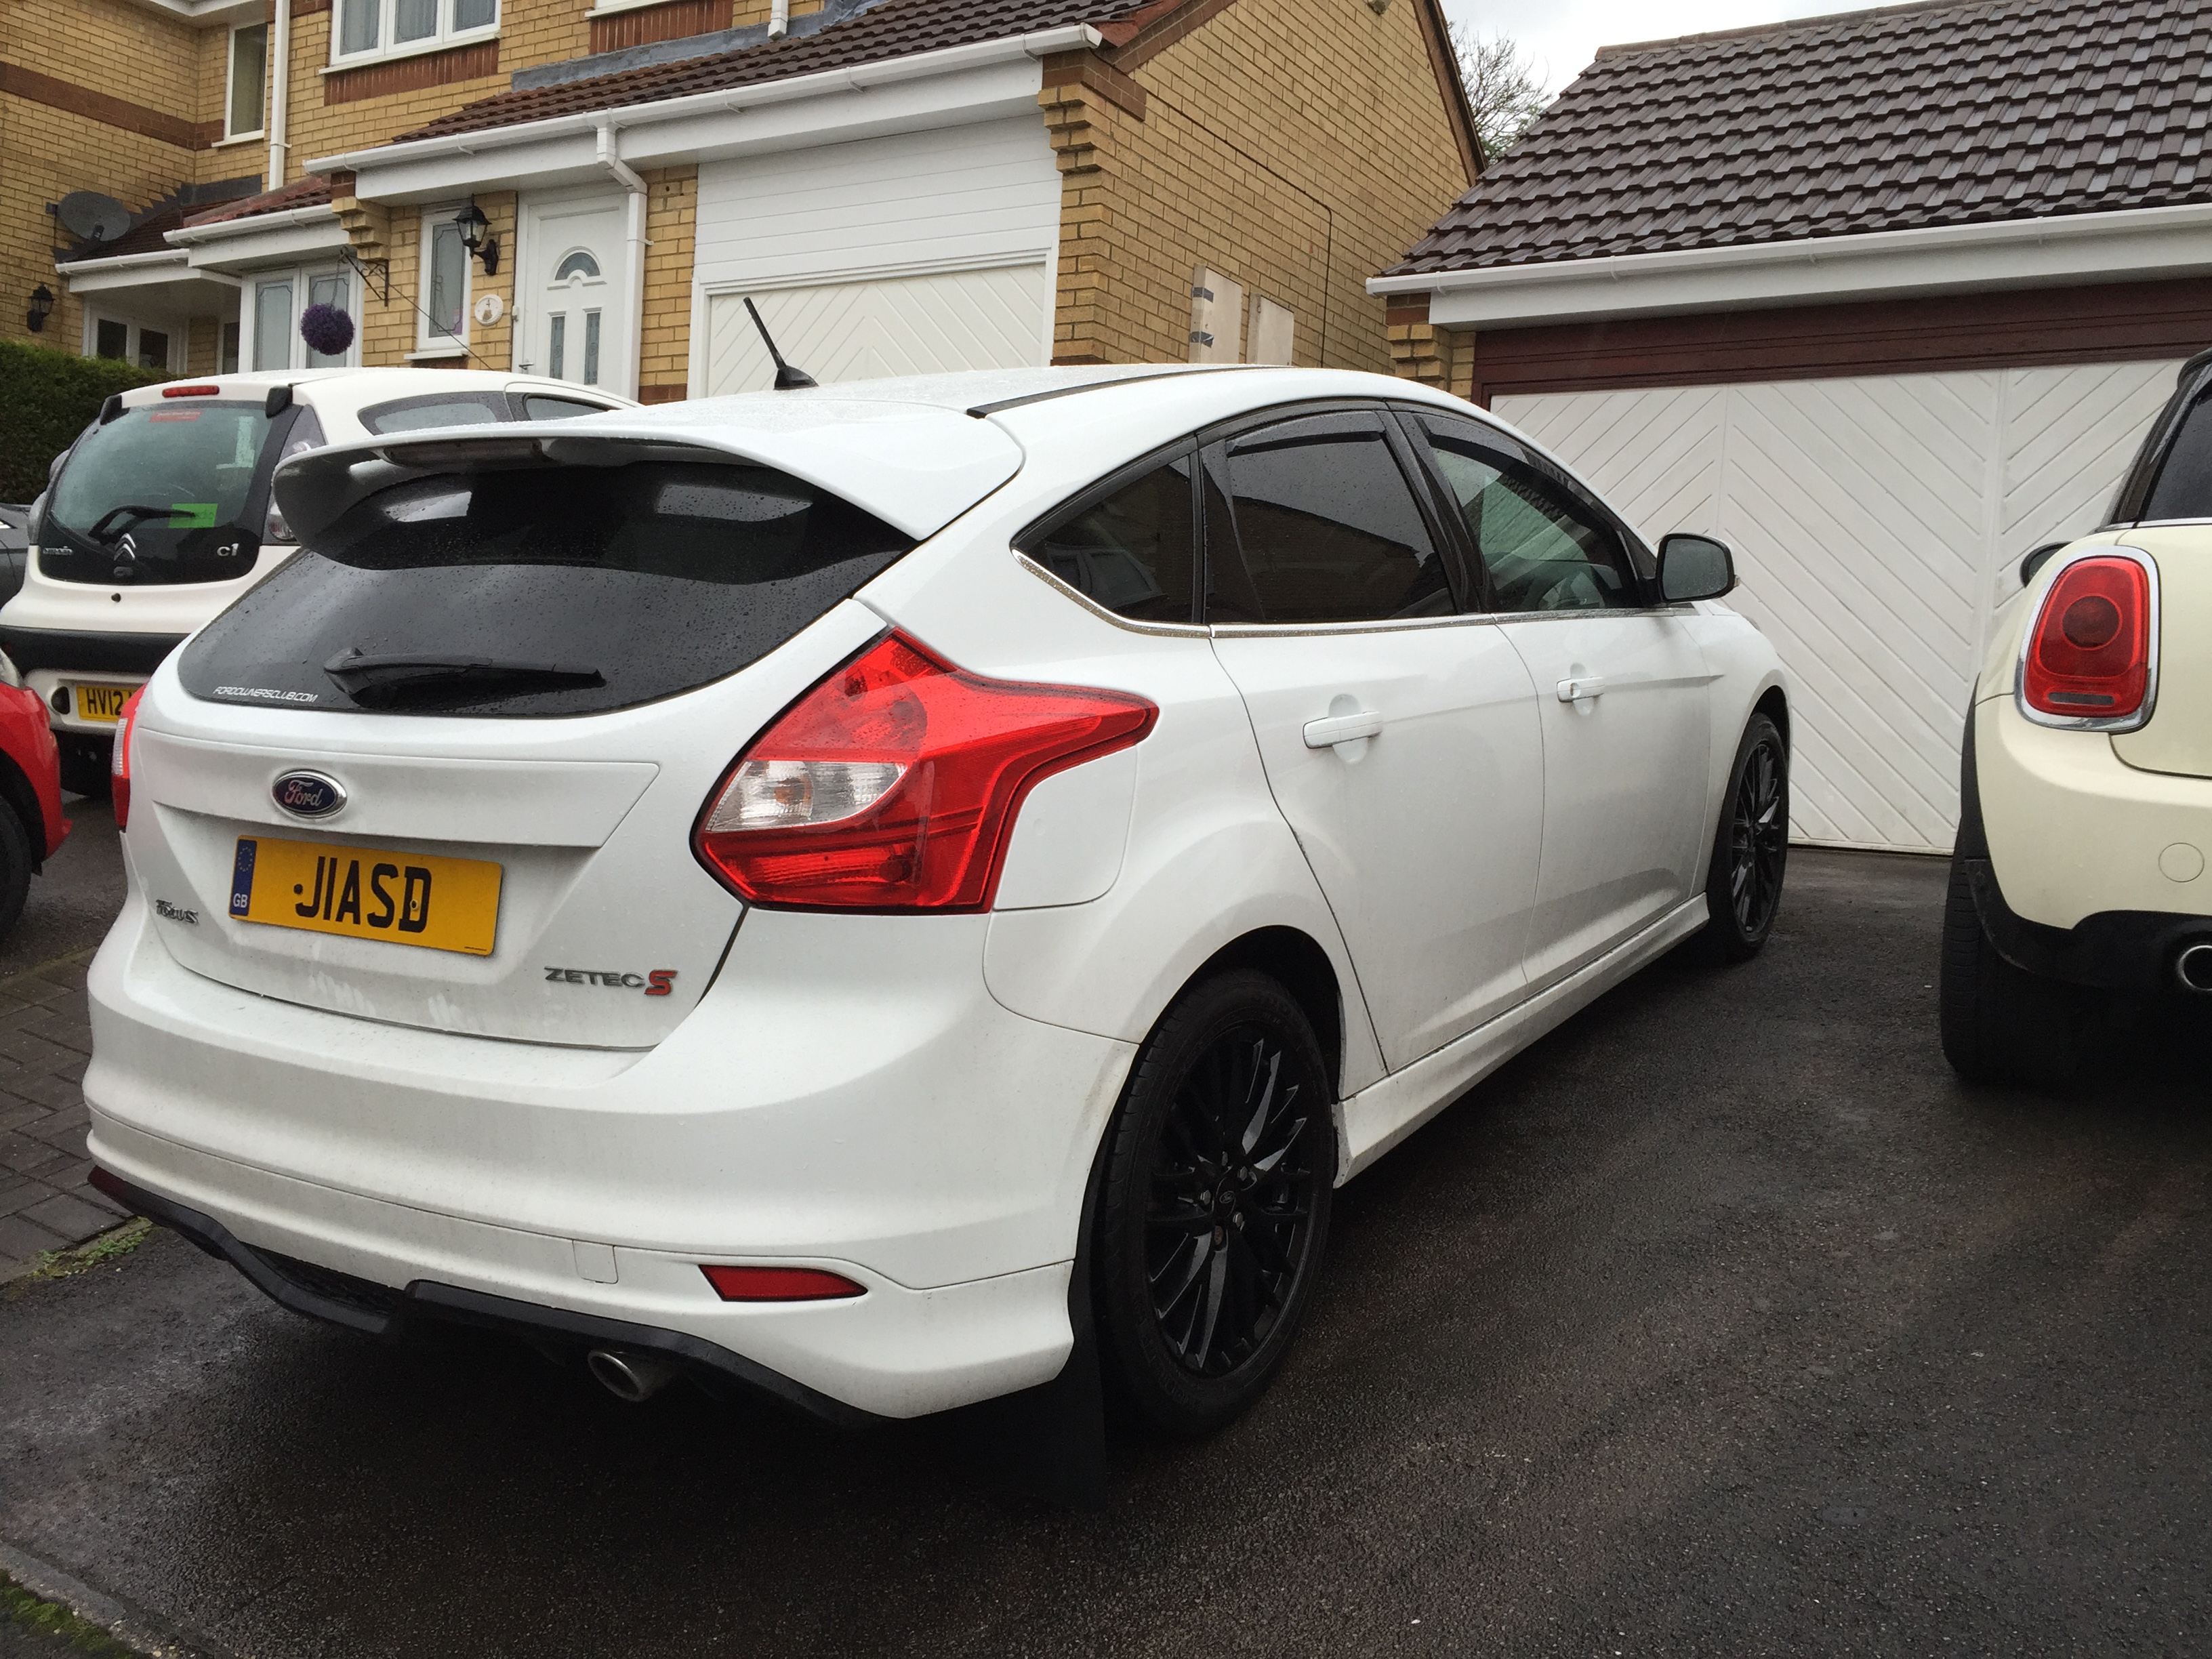 My Ford Focus MK3 Zetec S 2.0 TDCi Ford Project and